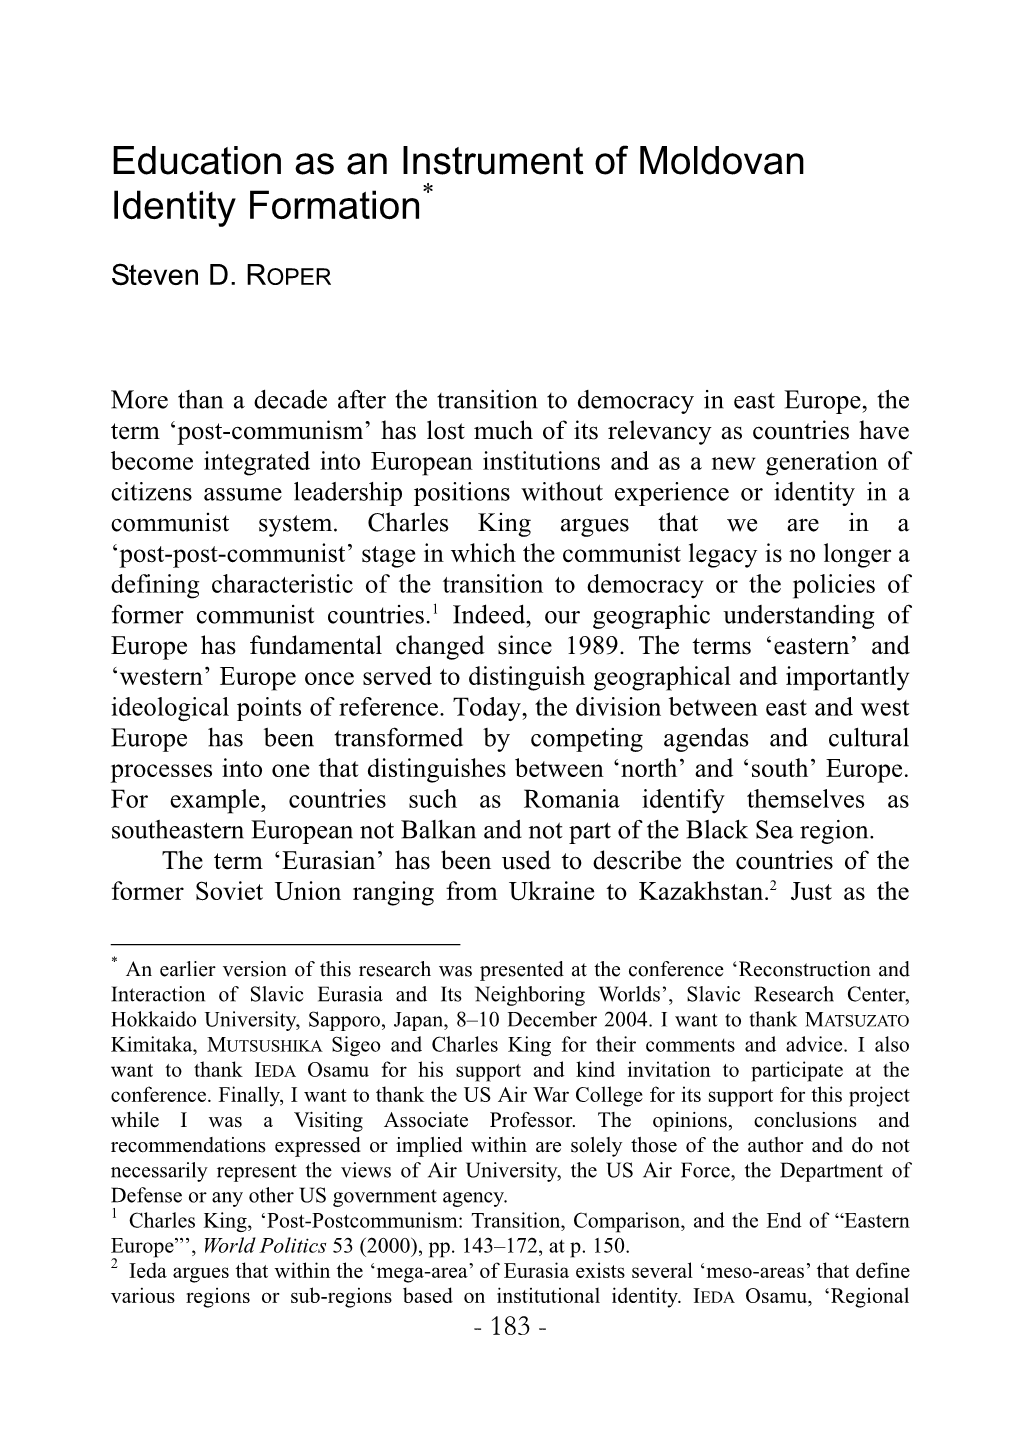 Education As an Instrument of Moldovan Identity Formation*